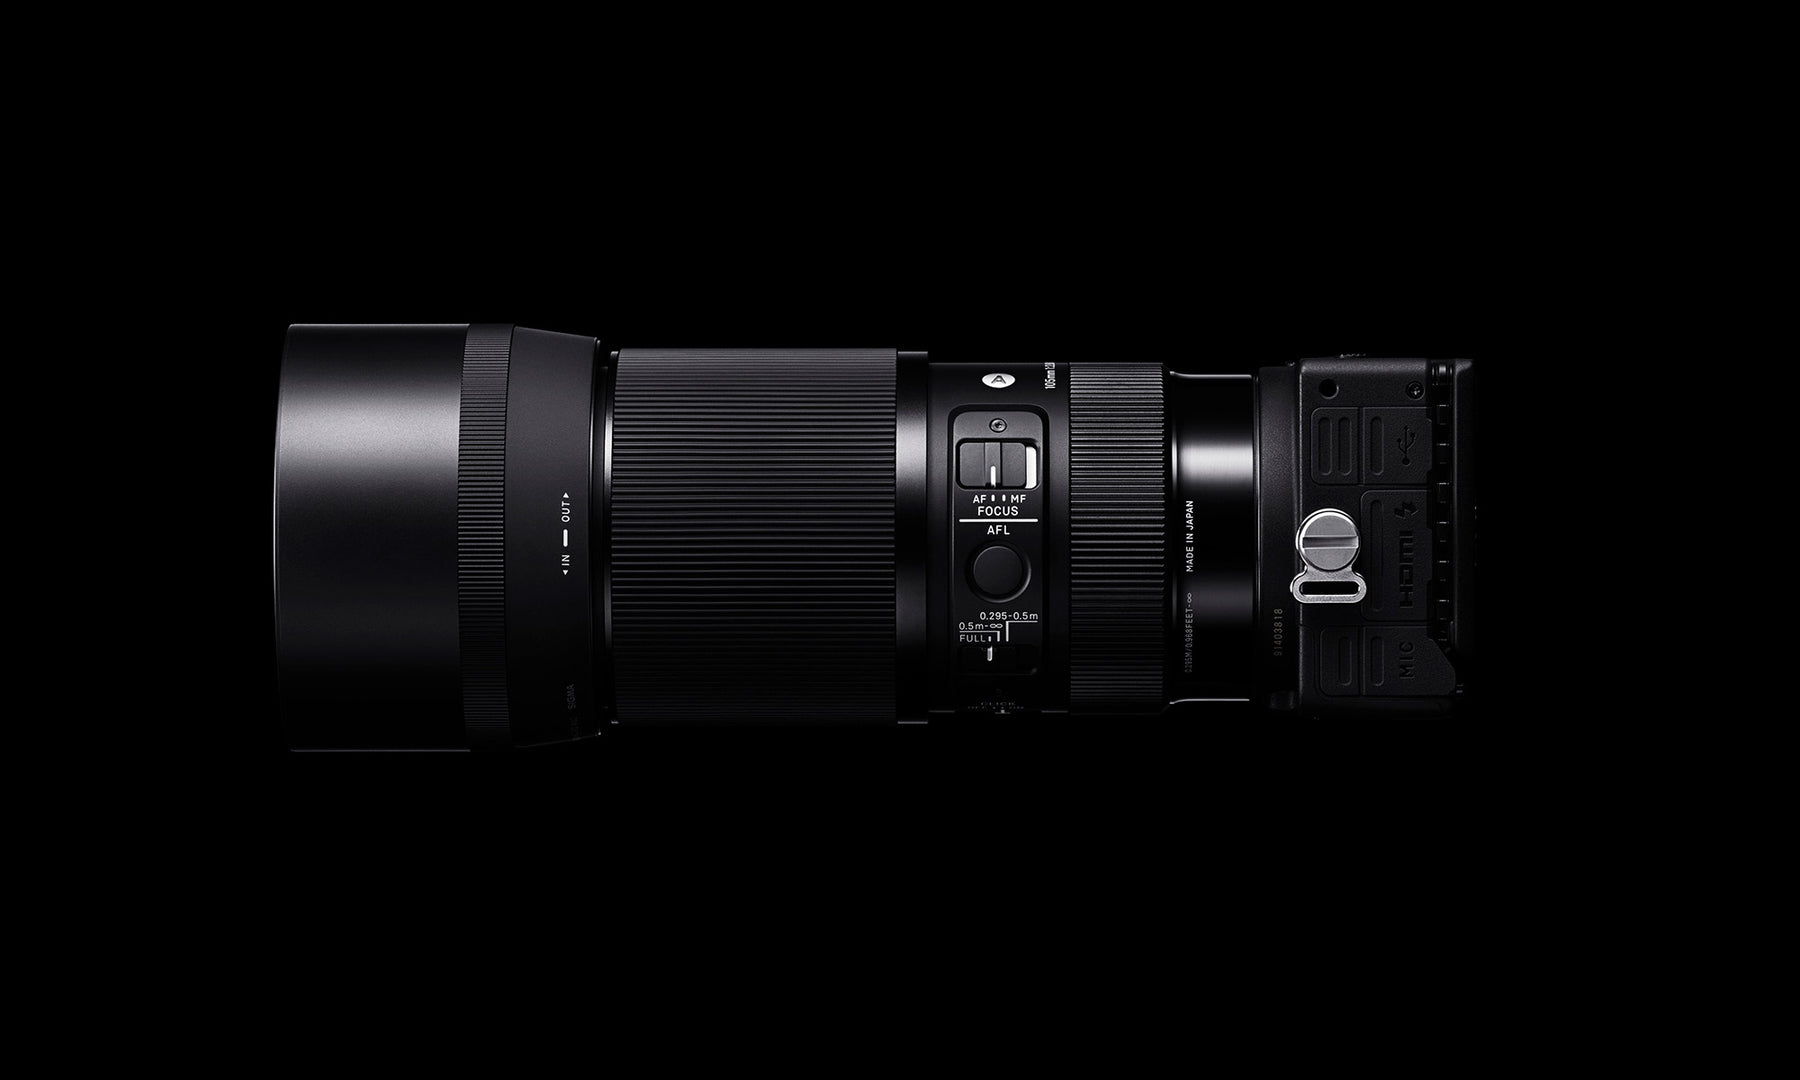 New Products Release Of Sigma 105mm F2.8 DG DN DN Macro Art